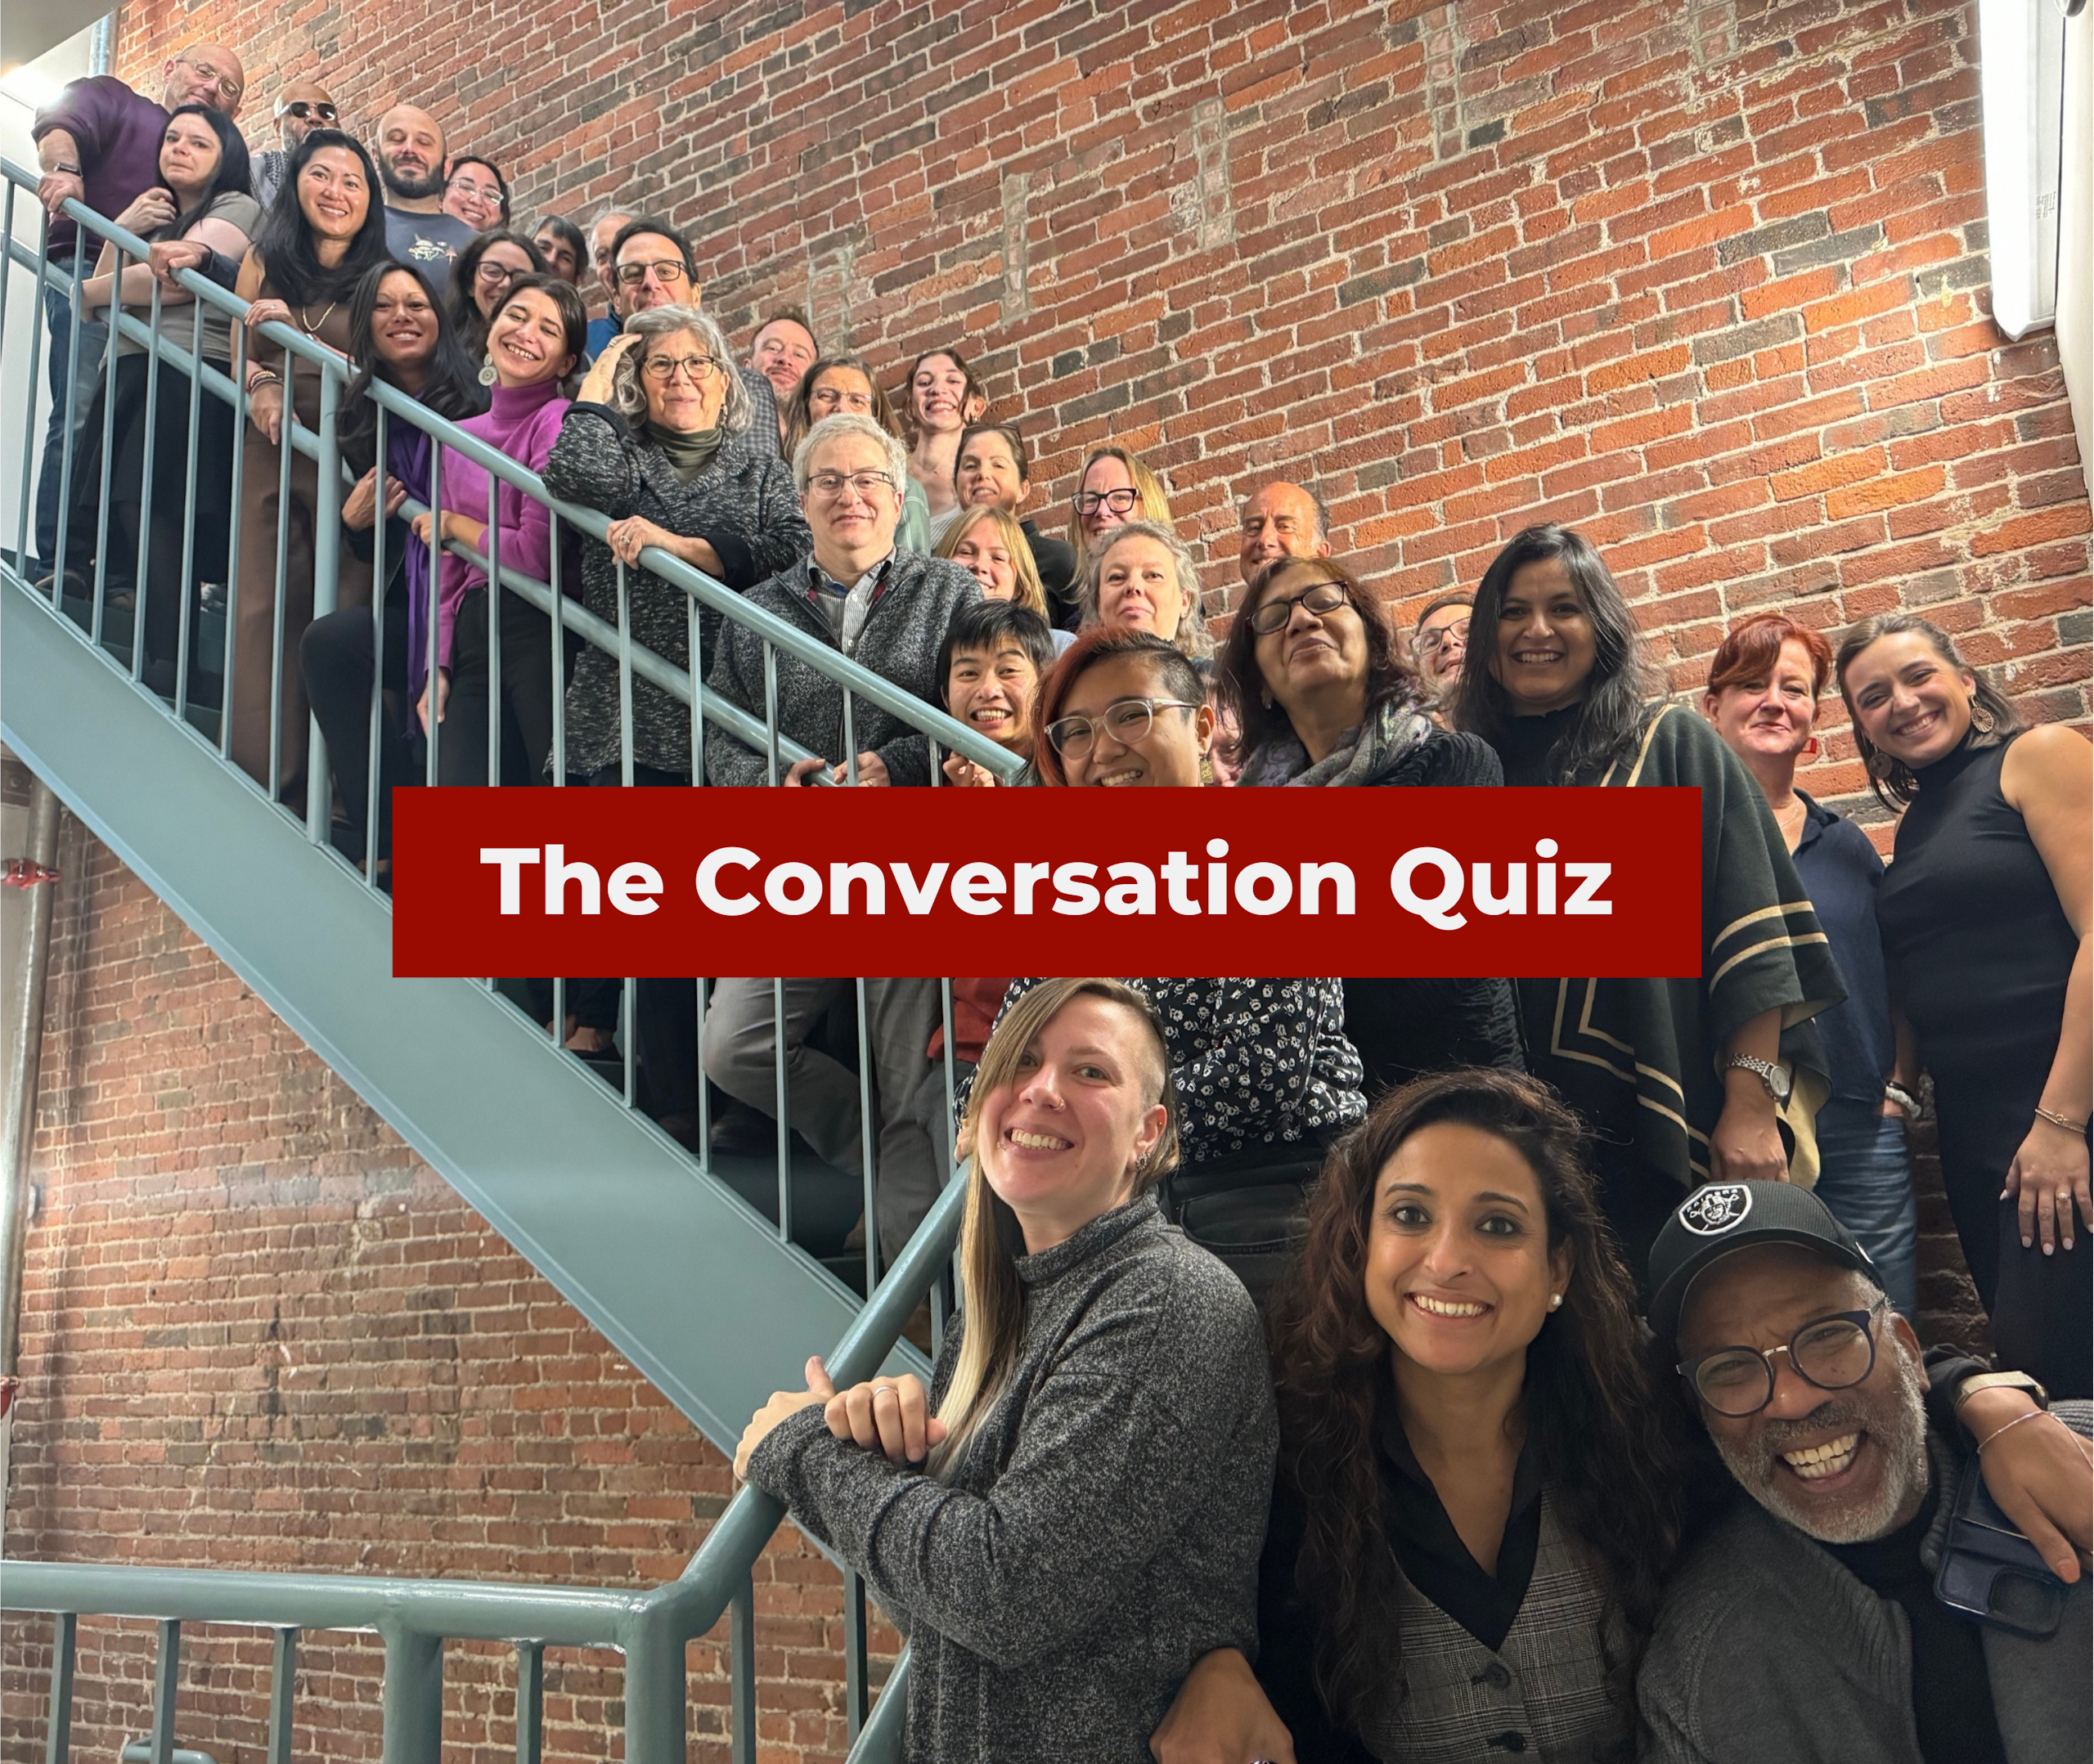 Graphic saying "The Conversation Quiz" over a photo of The Conversation's staff gathered in a stairwell